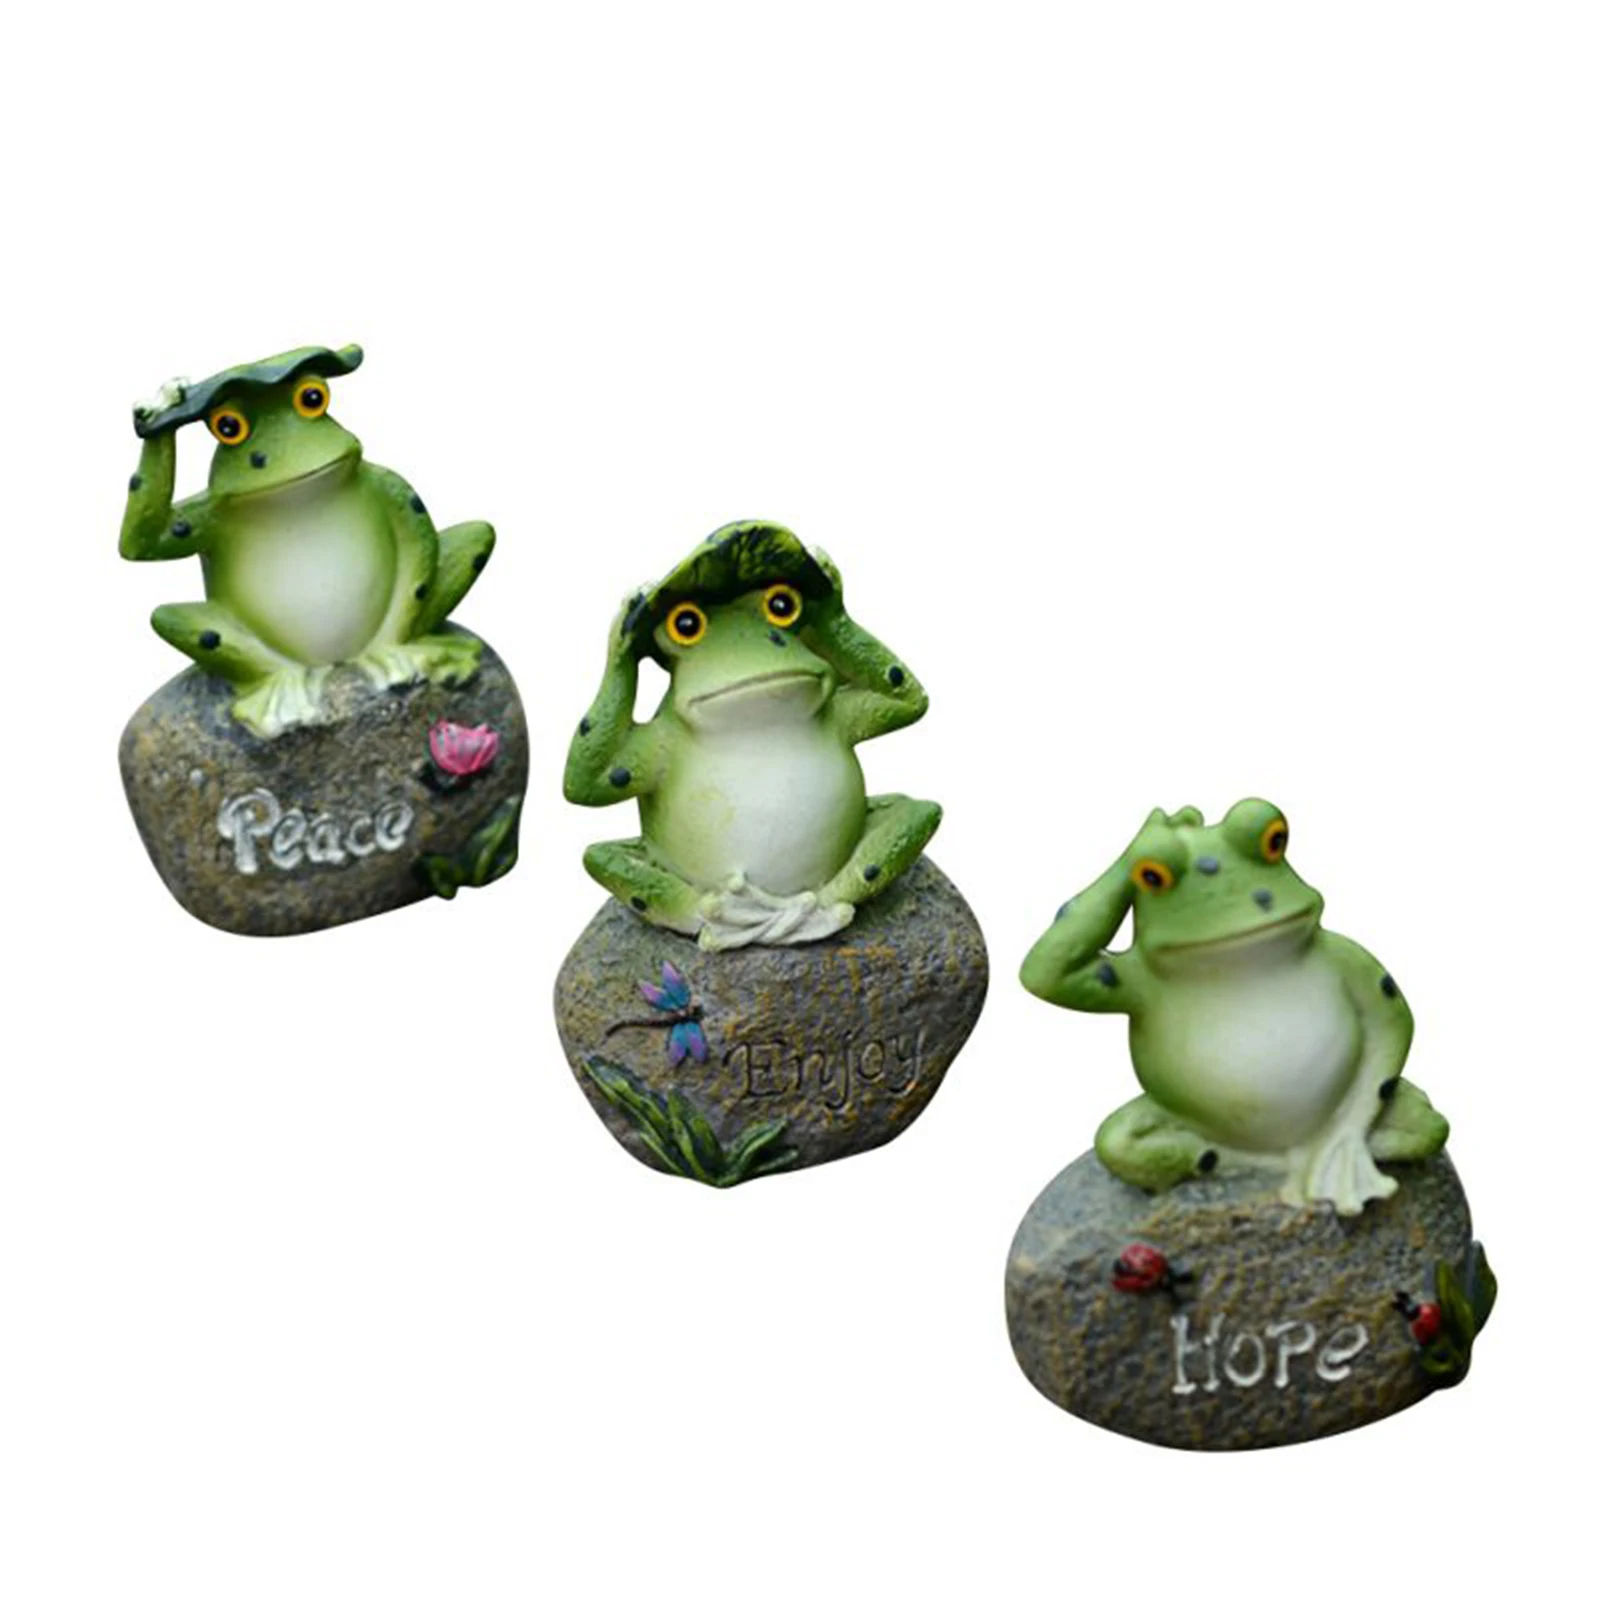 

5 Inch Garden Frog Statue Stone Sculptures Garden Patio Frogs Landscaping Stone Ornaments Decoration JS22